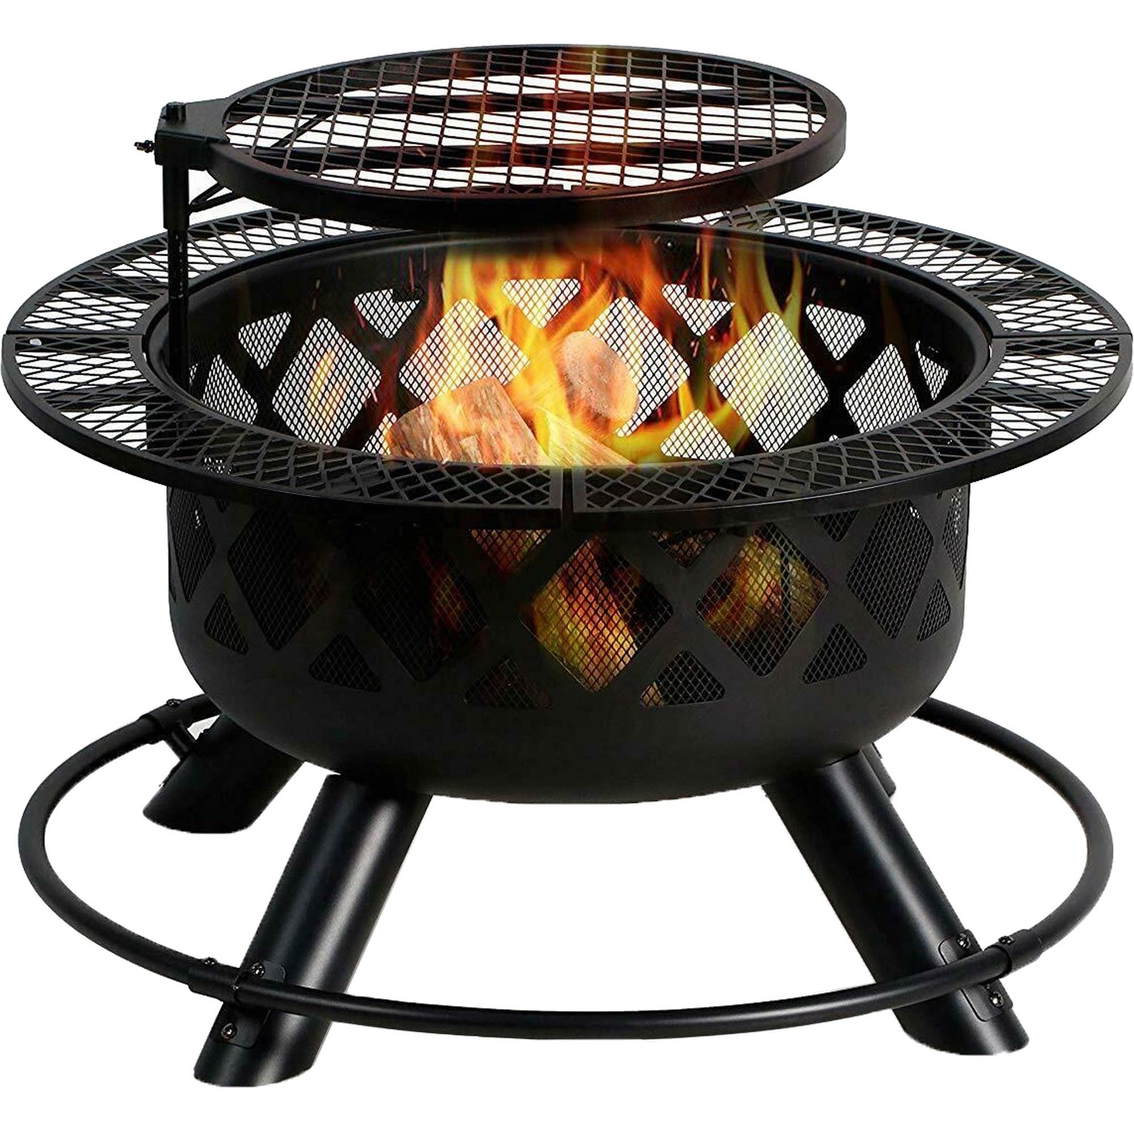 Heatmaxx 32 in. Wood Fire Pit and Grill - Image 2 of 2